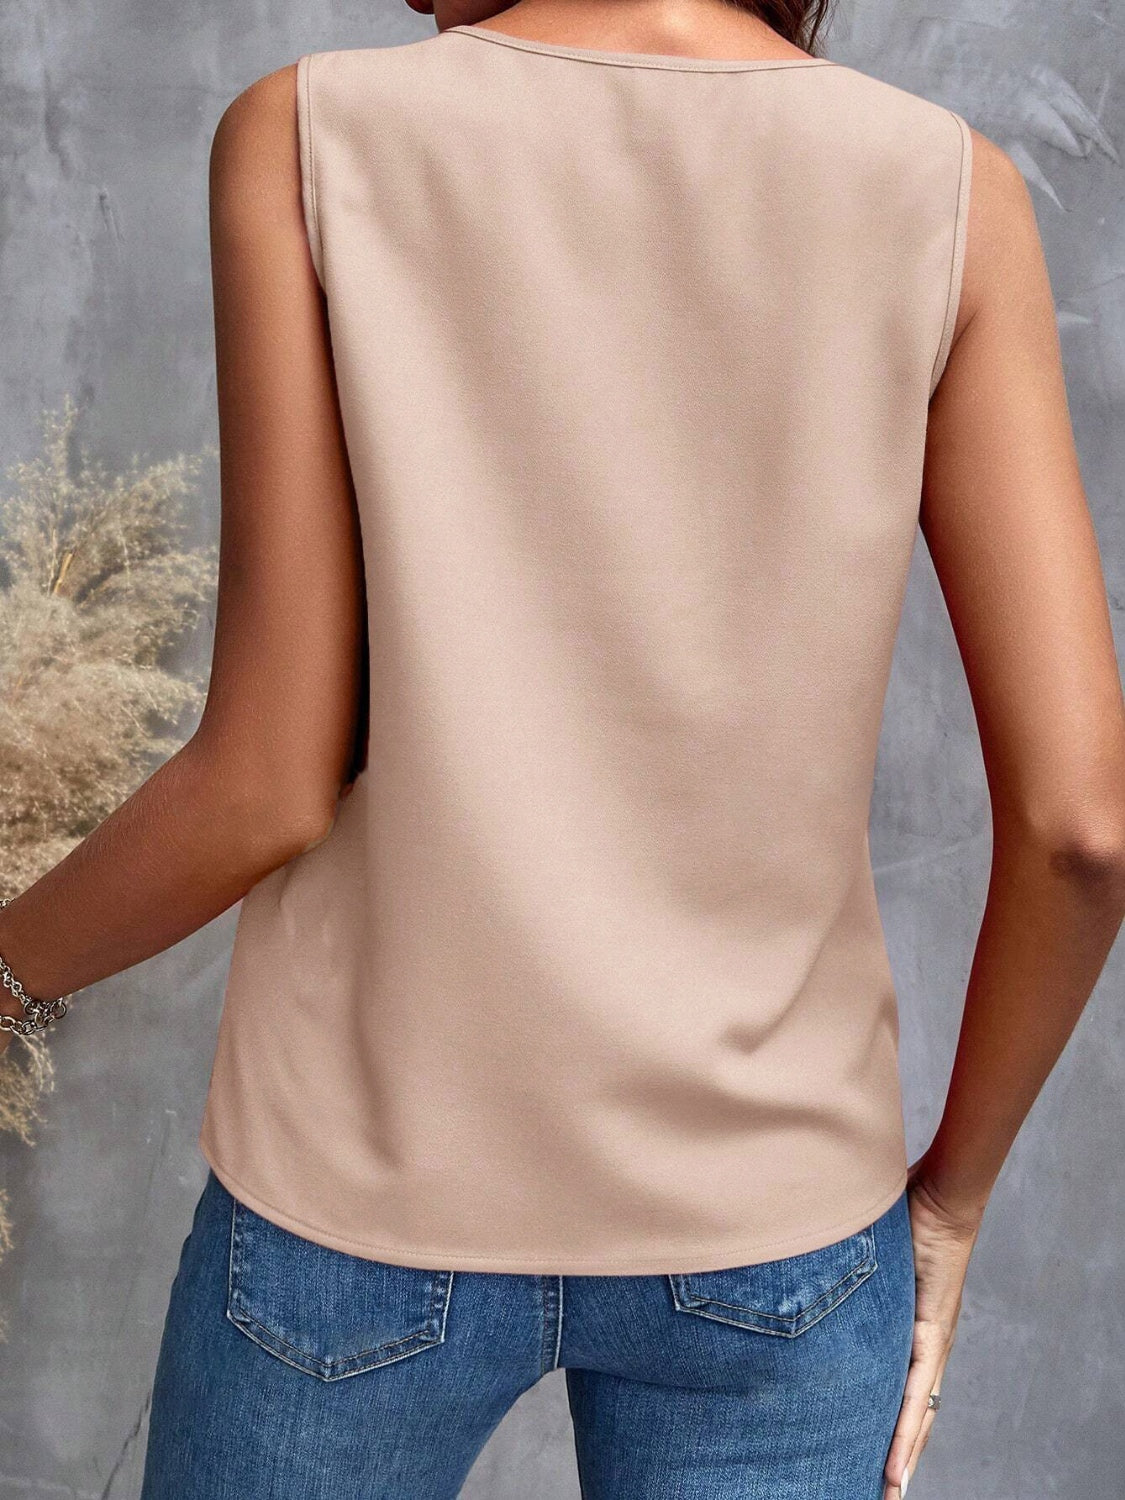 Stylish beige ruffle top paired with jeans, great for casual outings